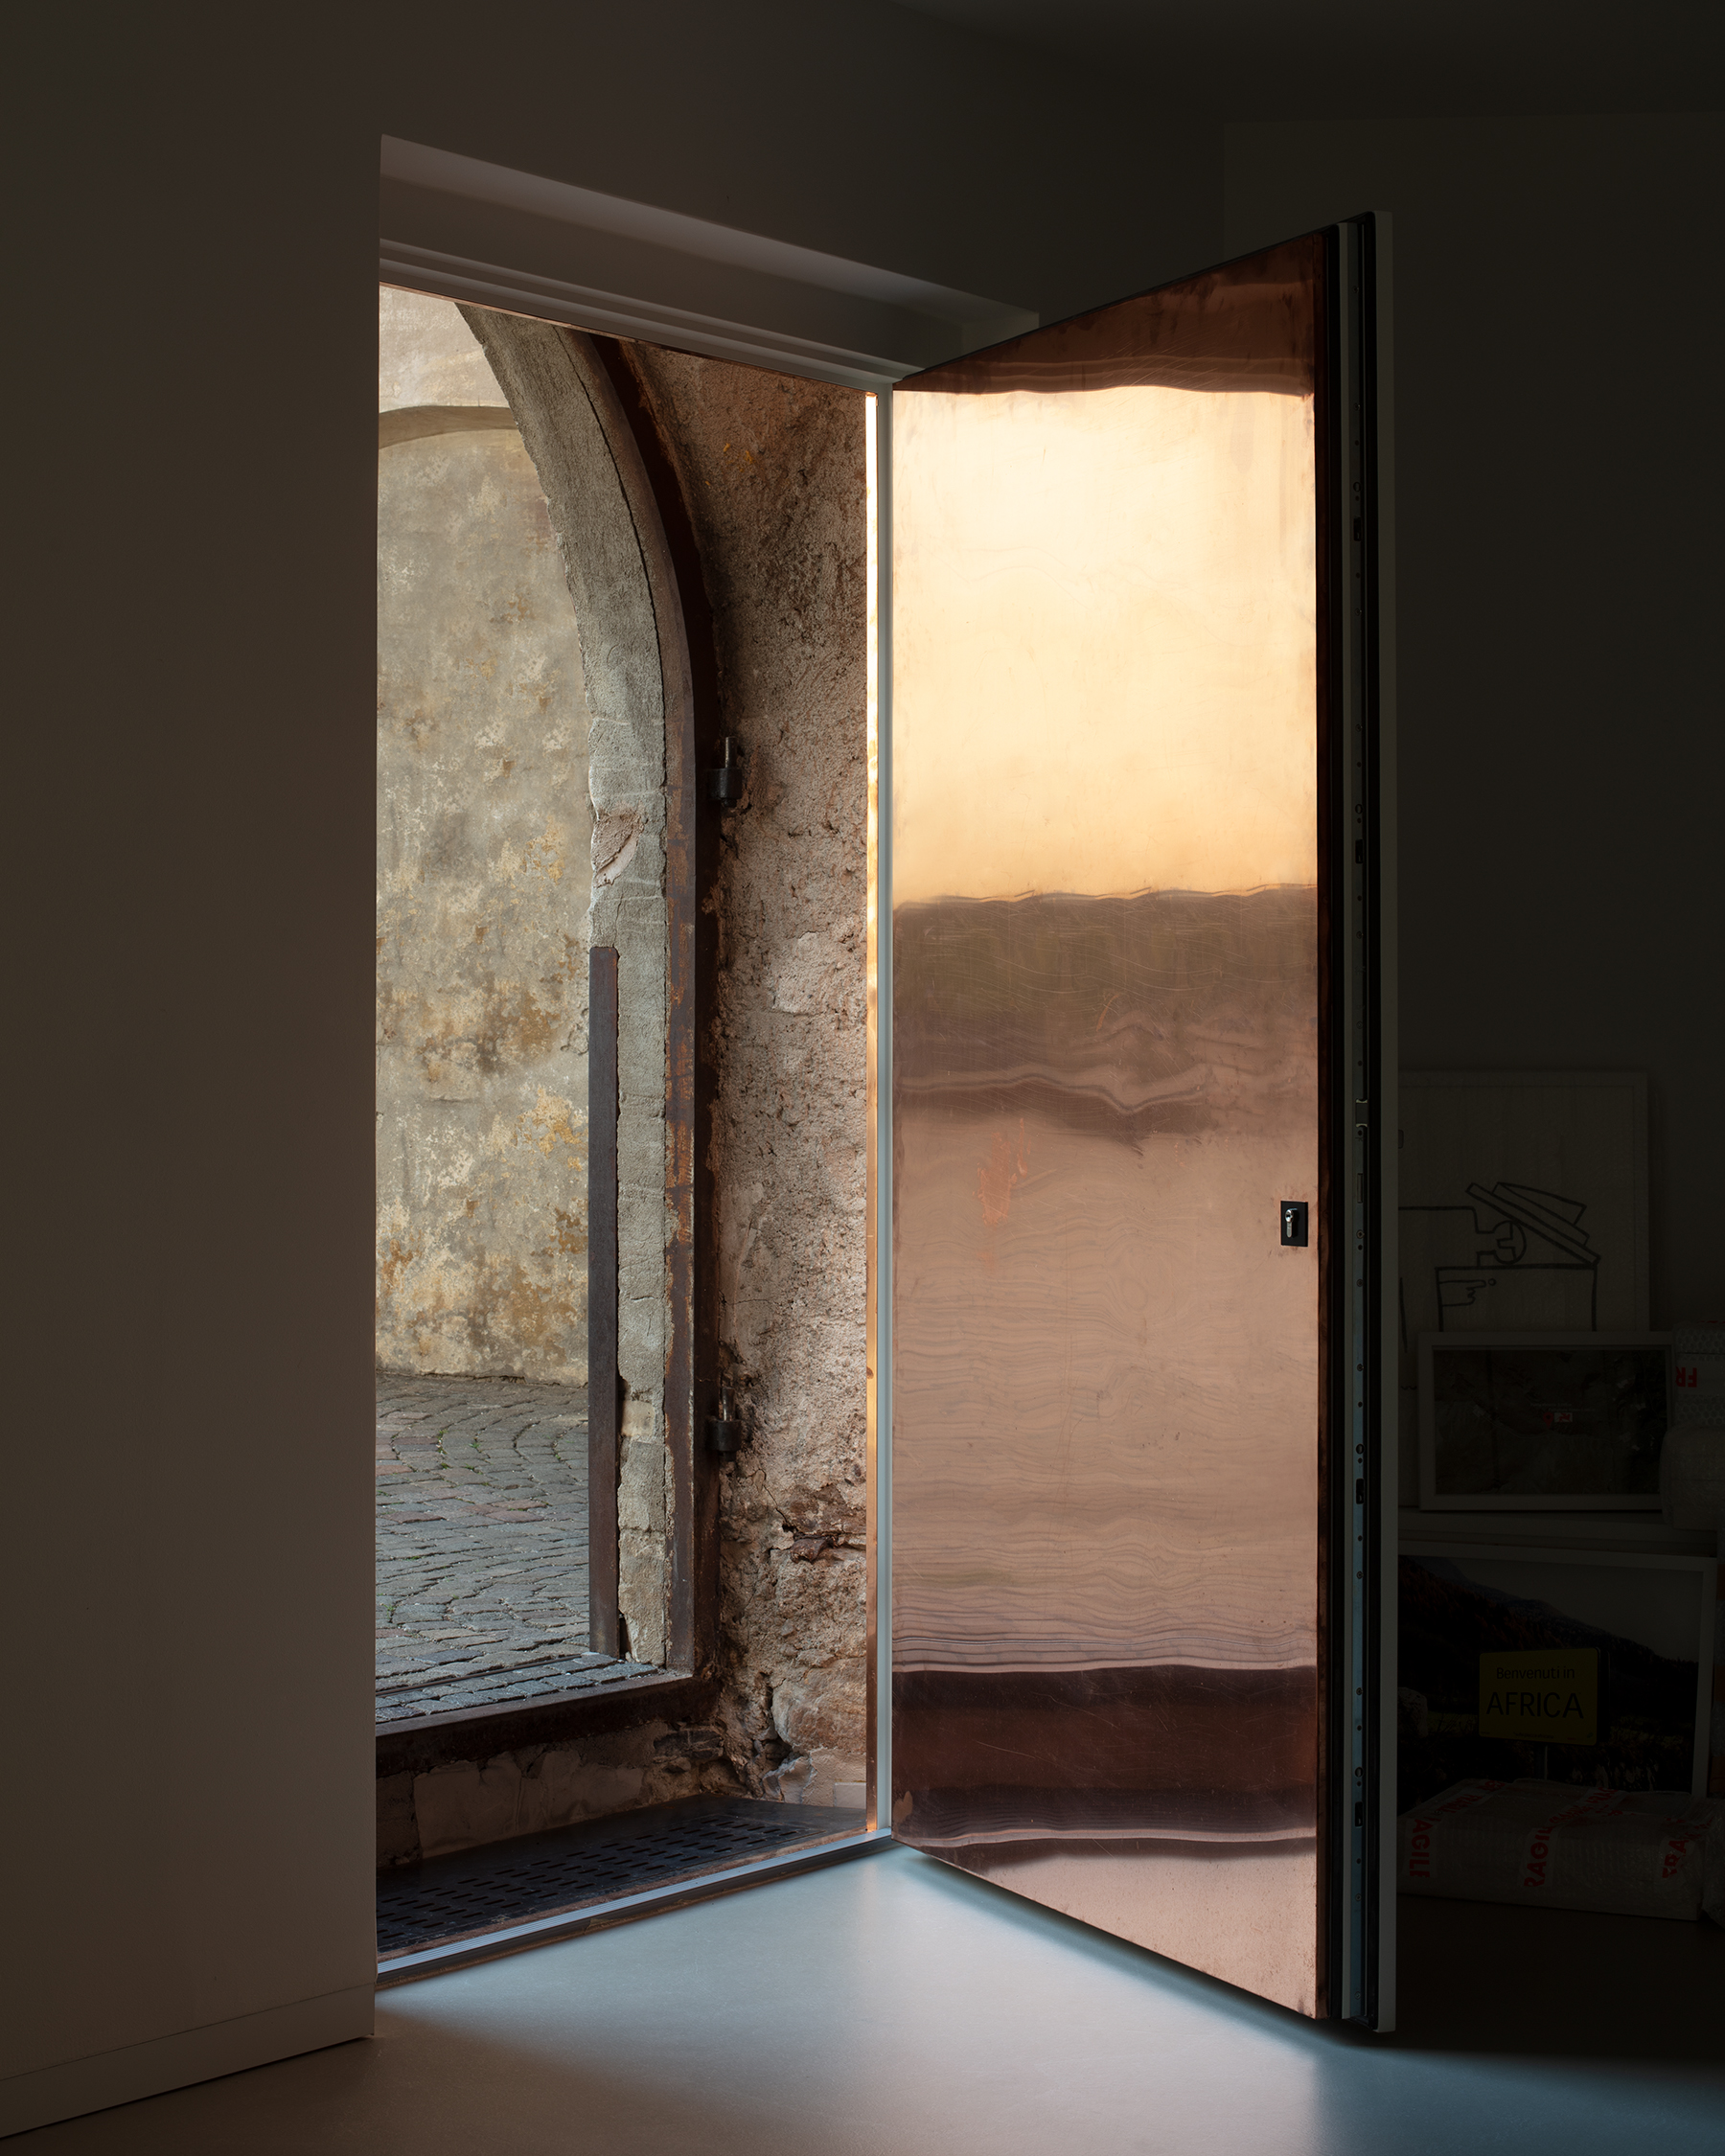 Messner Architect placed a reflective door that further adds to the aesthetics of the room